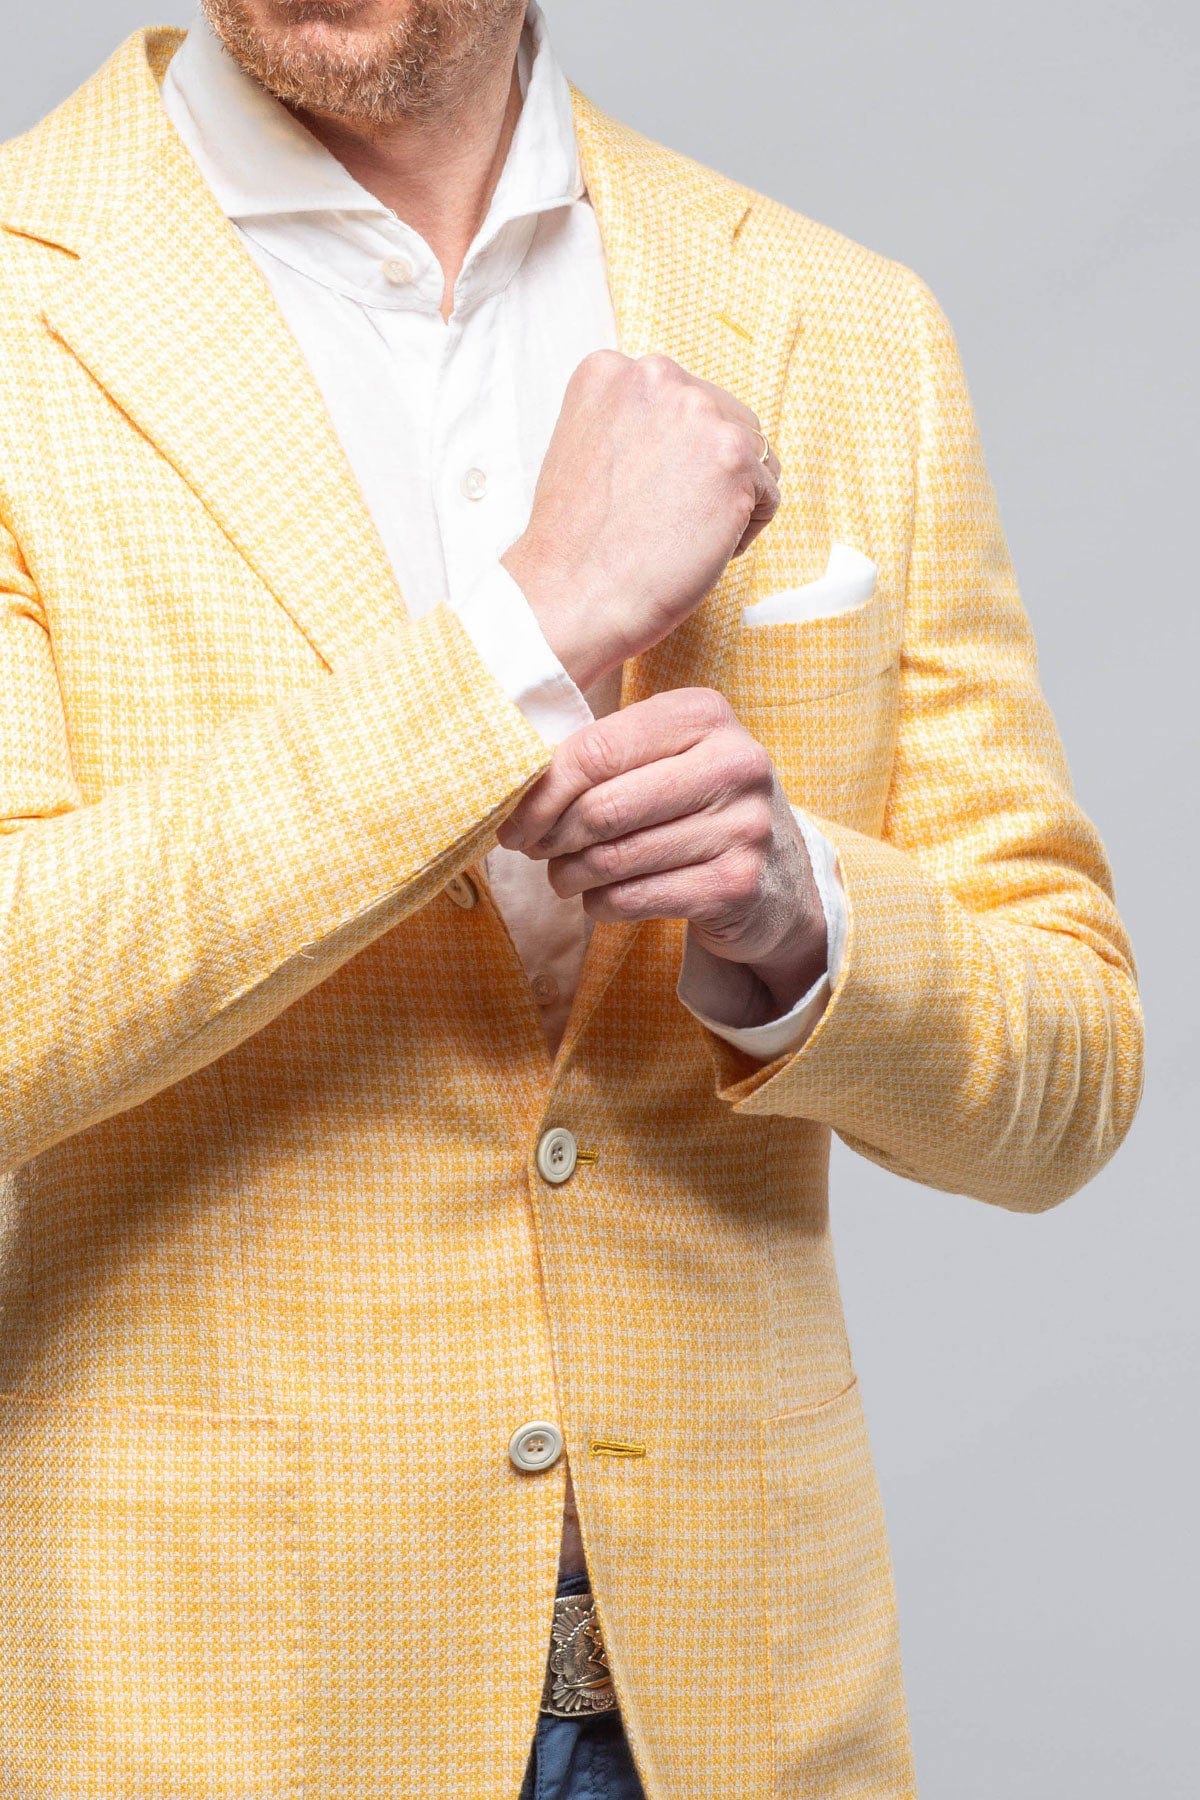 SF90 Cashmere Sport Coat - AXEL'S